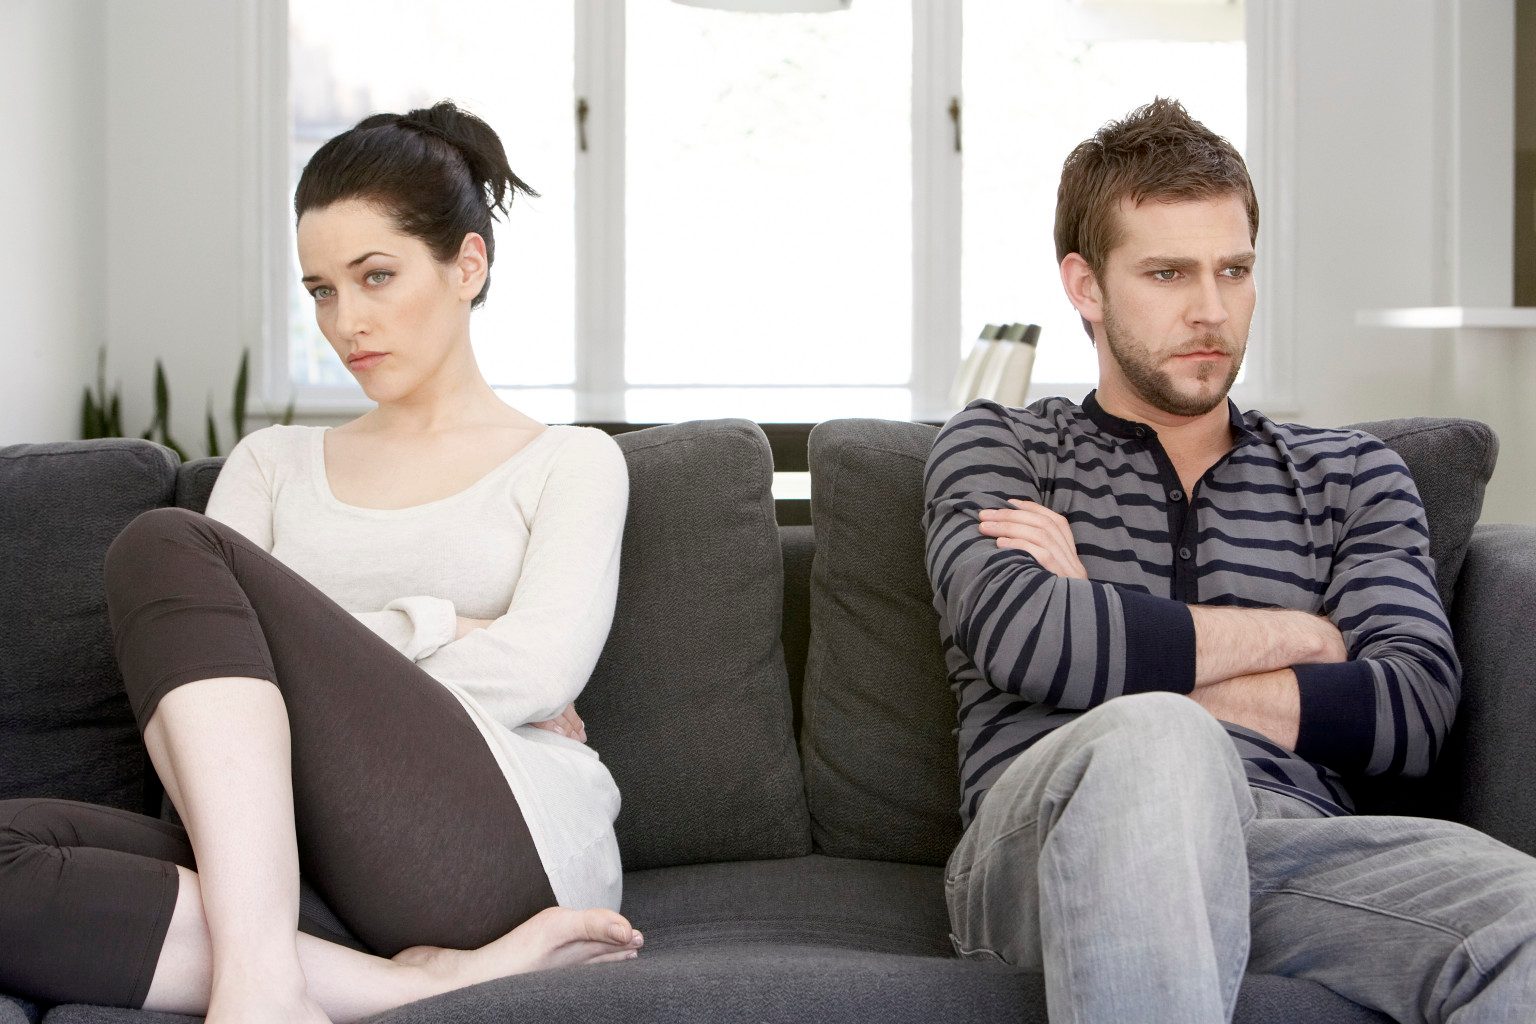 Couple sitting on sofa with anger on each other